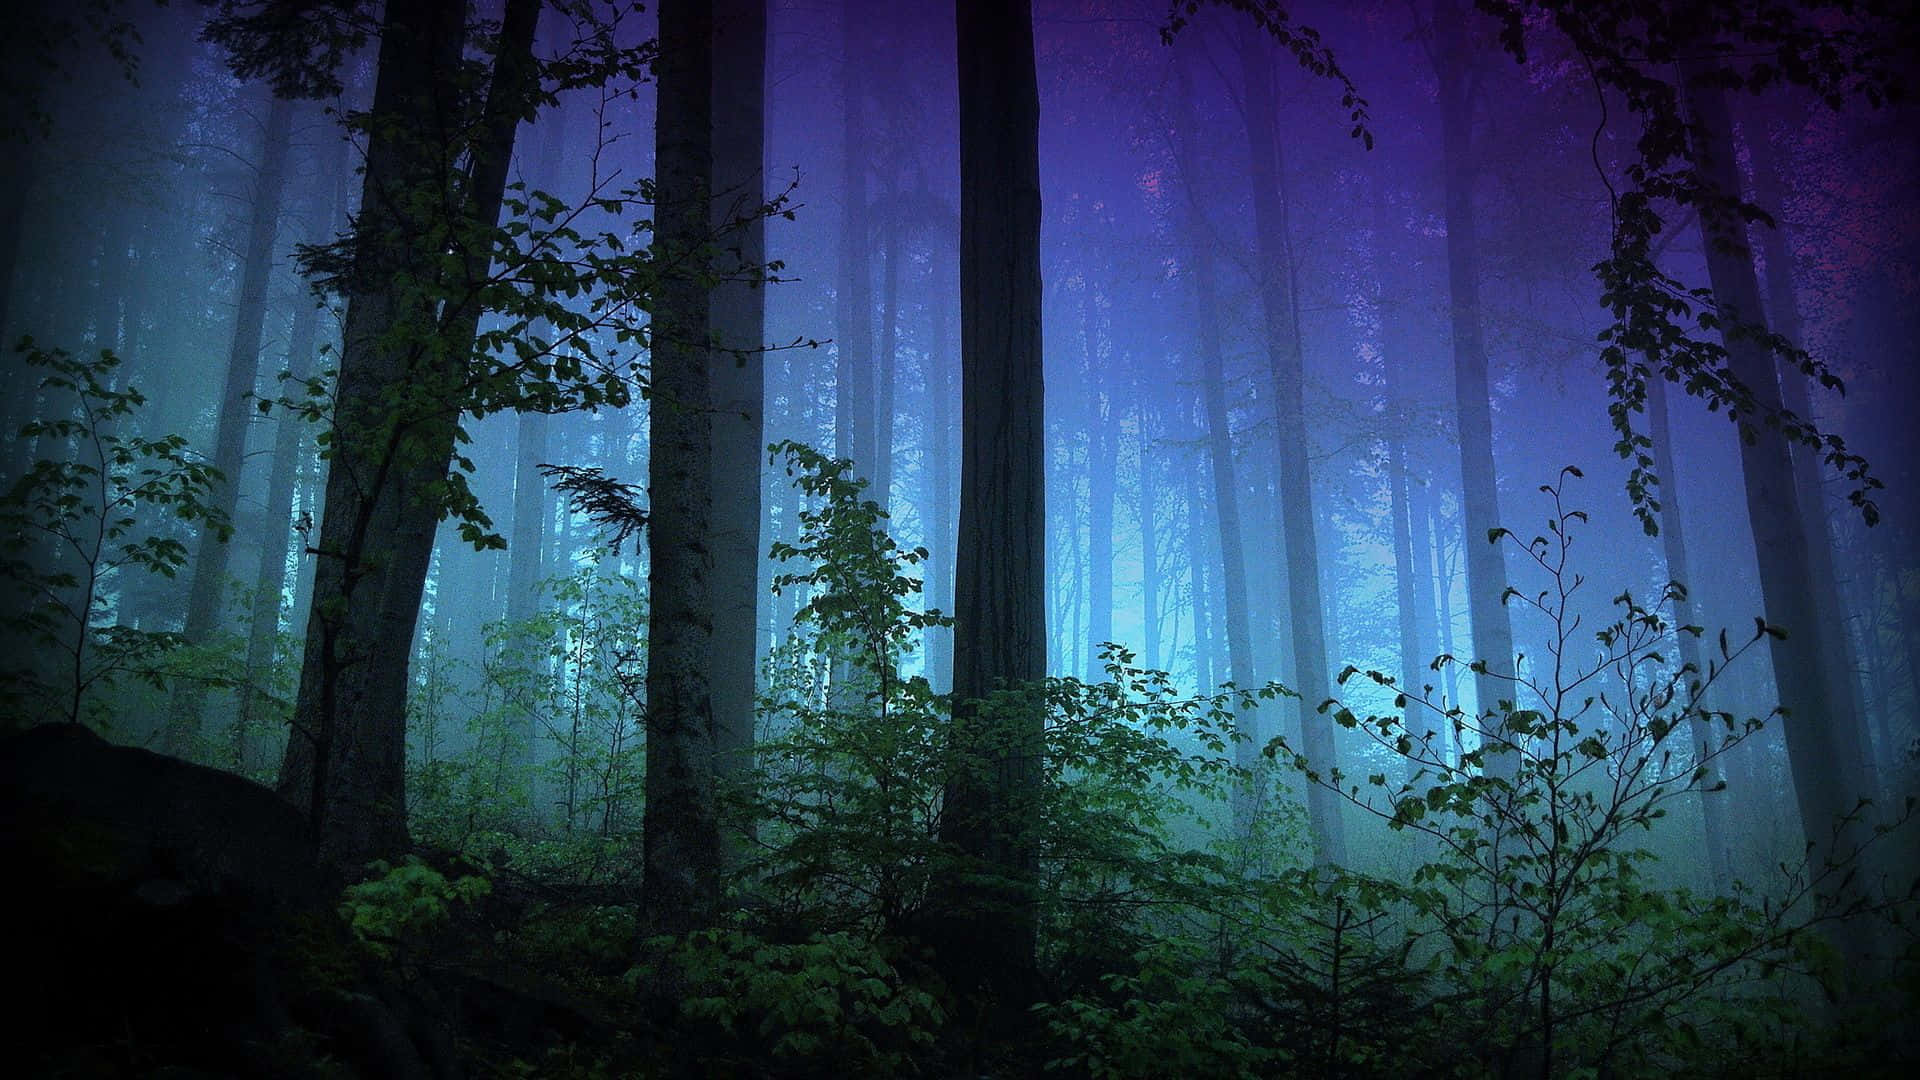 Explore the depths of a mysterious night forest Wallpaper